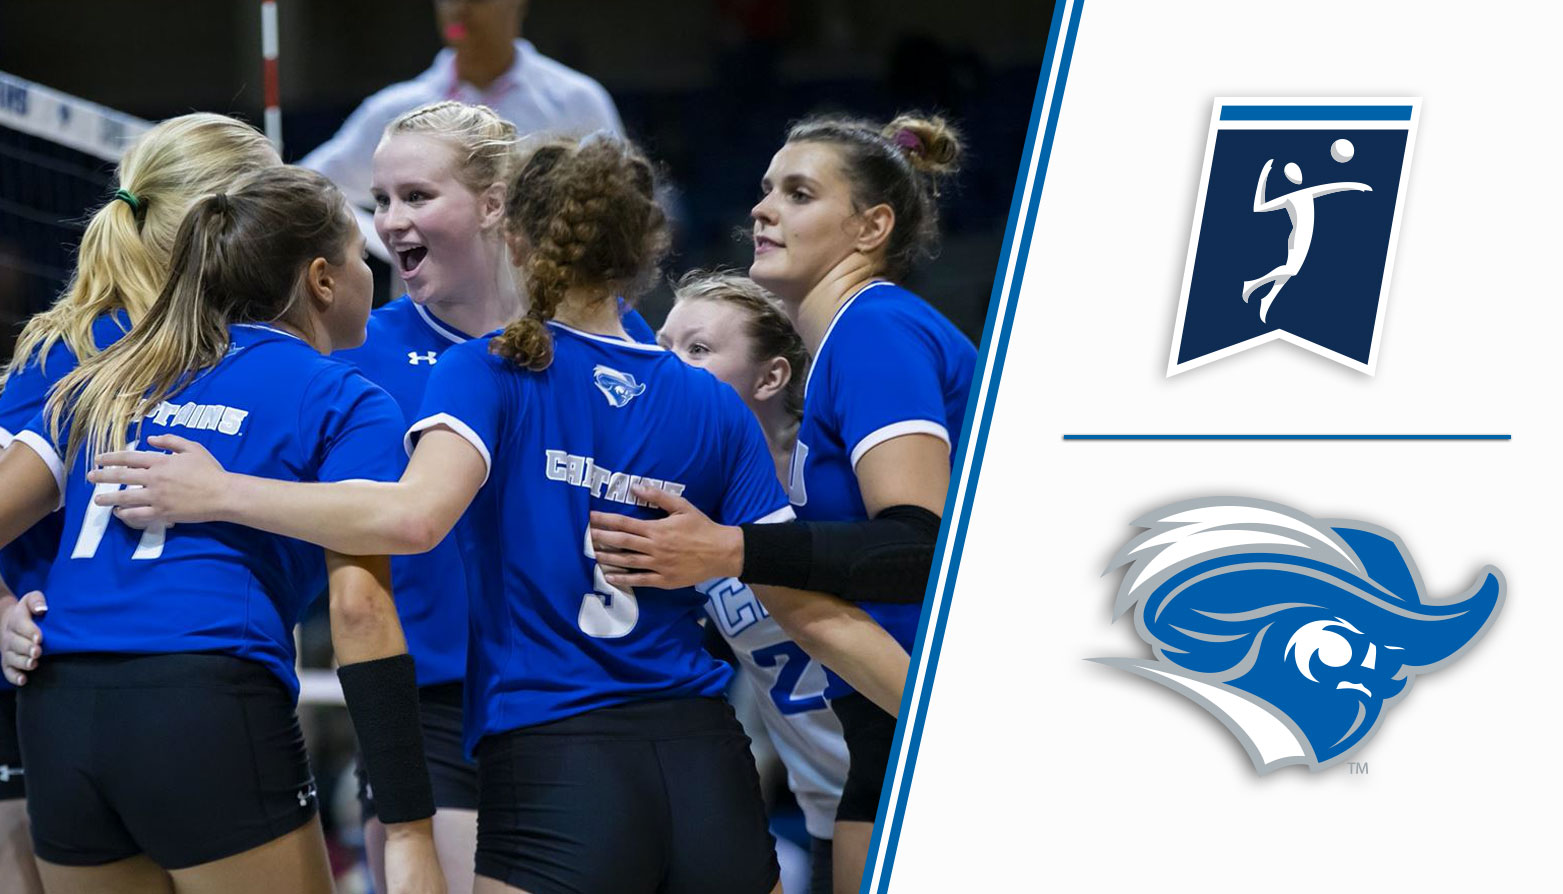 Christopher Newport Selected to Host NCAA Volleyball Regional; Face Stevenson in First Round